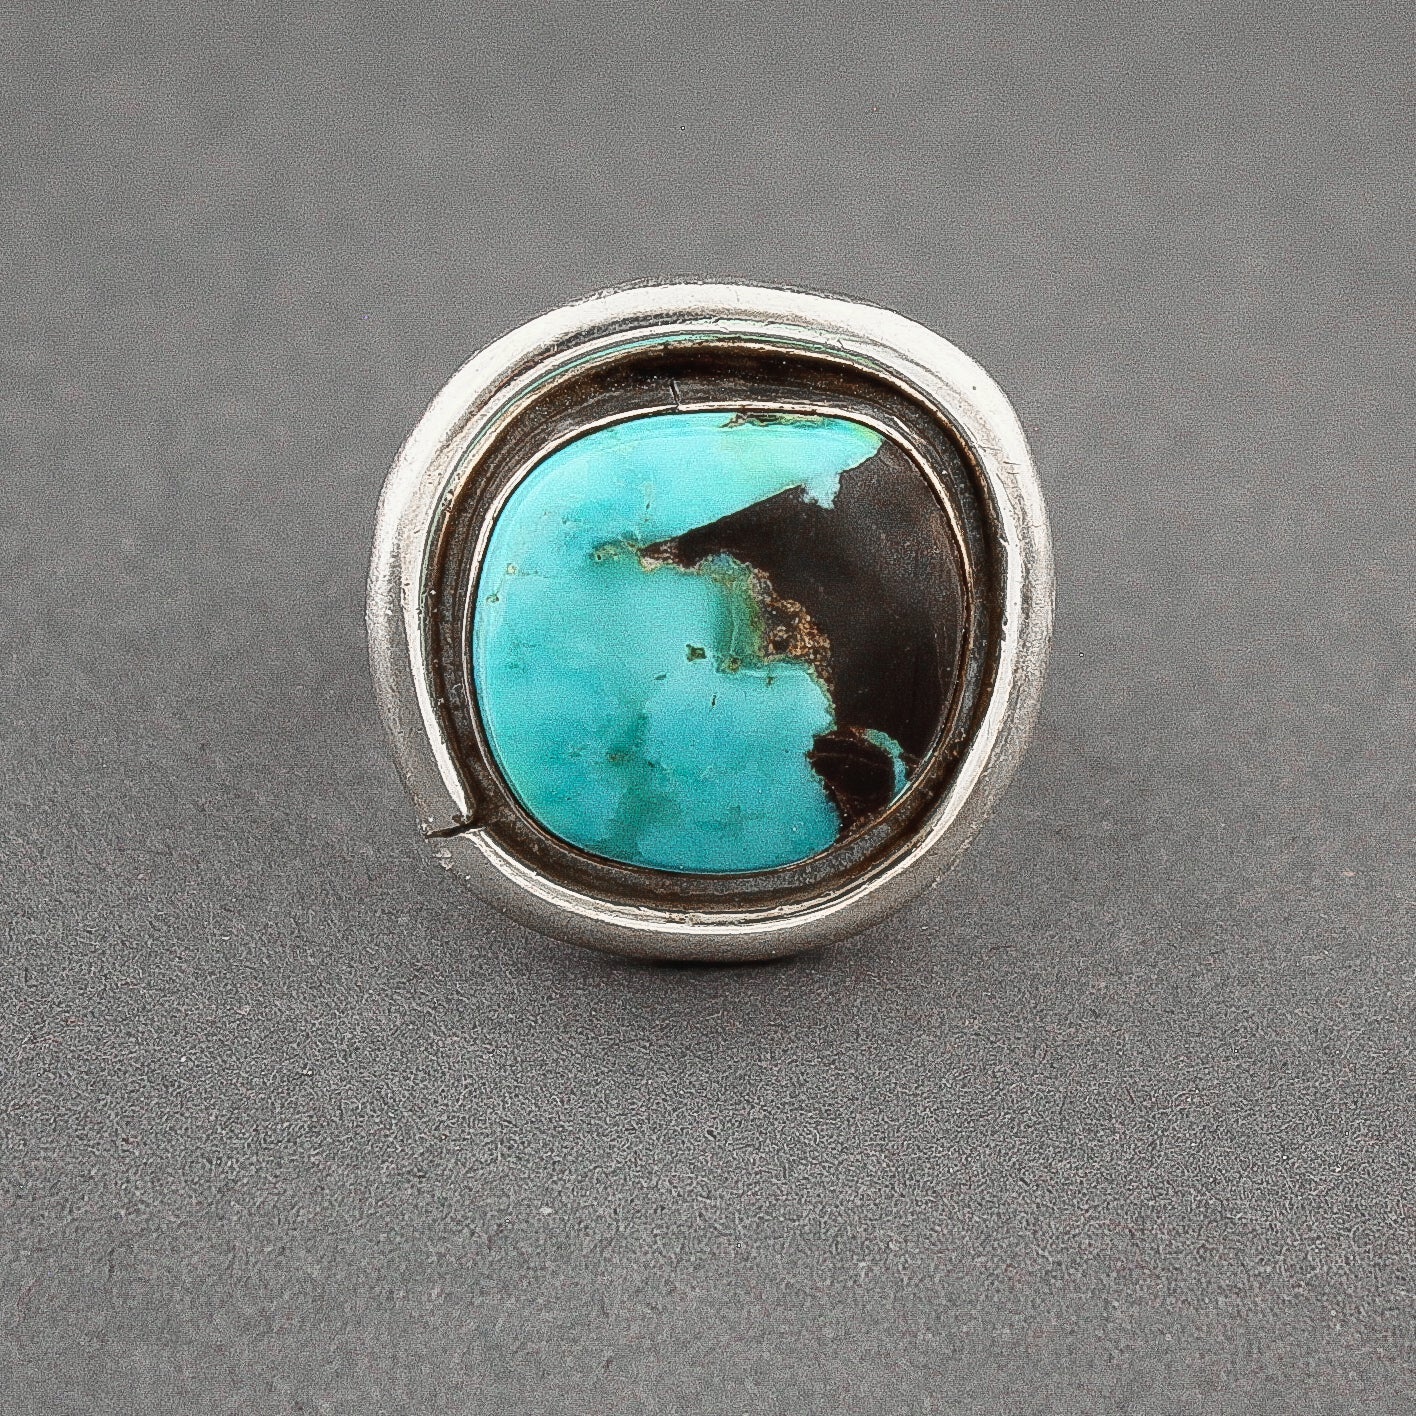 Silver and Turquoise Ring by Tony Aguilar - Turquoise & Tufa